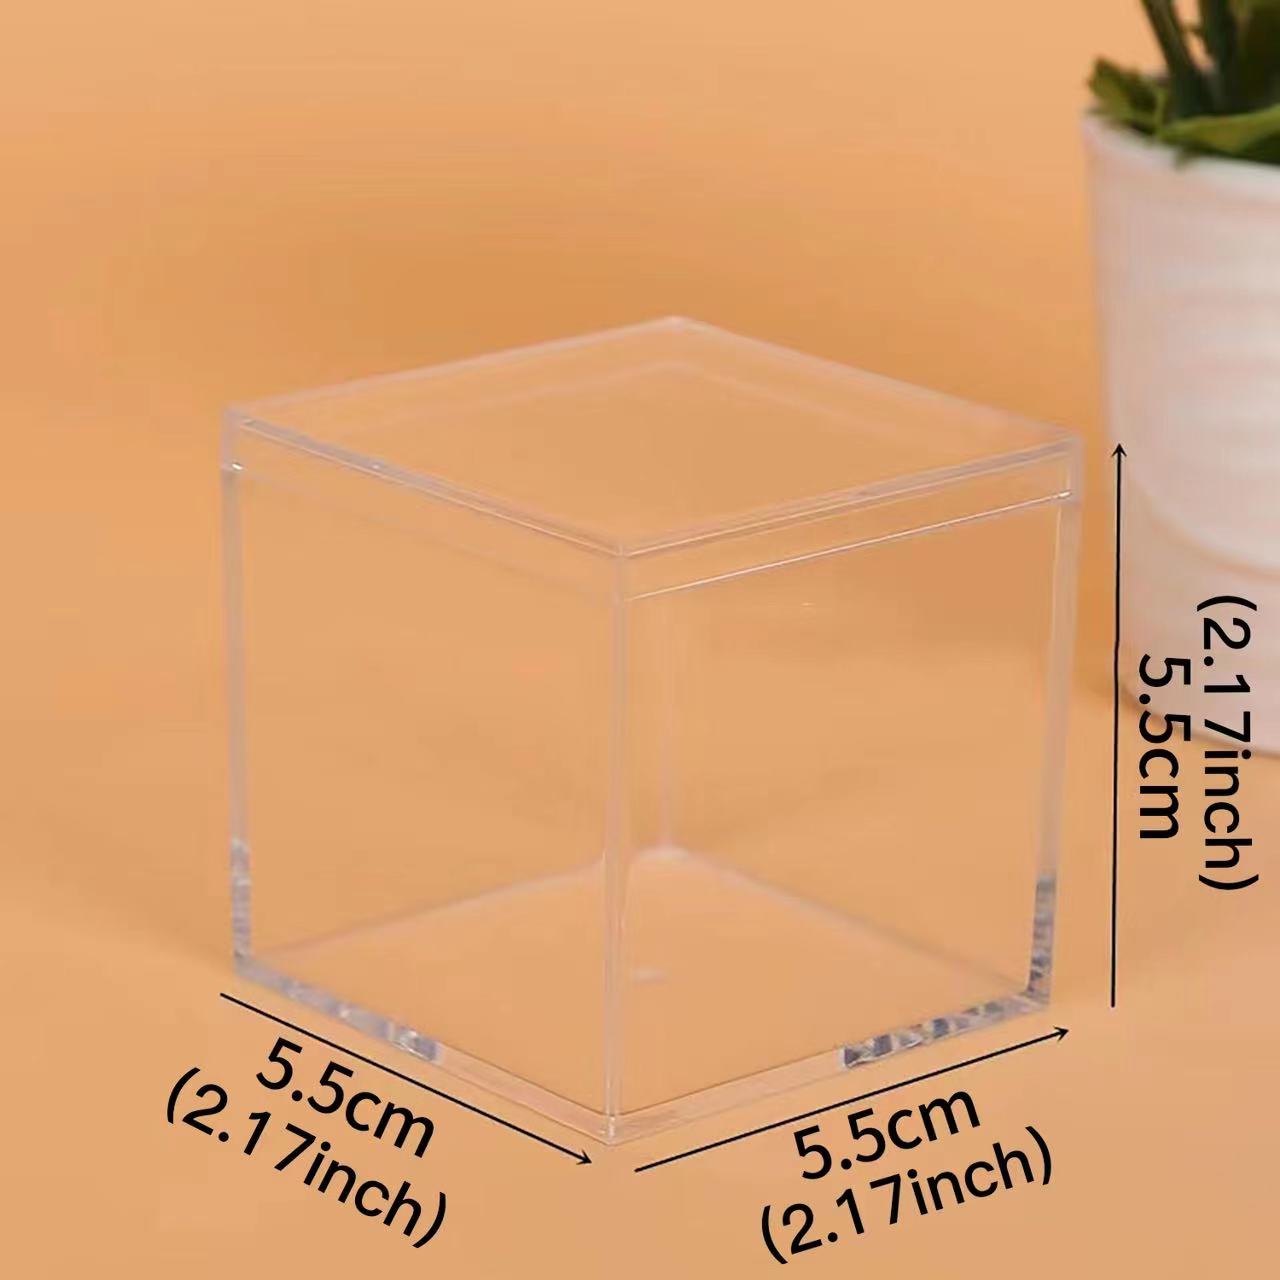 Acrylic Box for Candy Clear Acrylic Rectangle Display Box Transparent Cube Containers with Lid Jewelry Storage Wedding Thanksgiving Party Favor